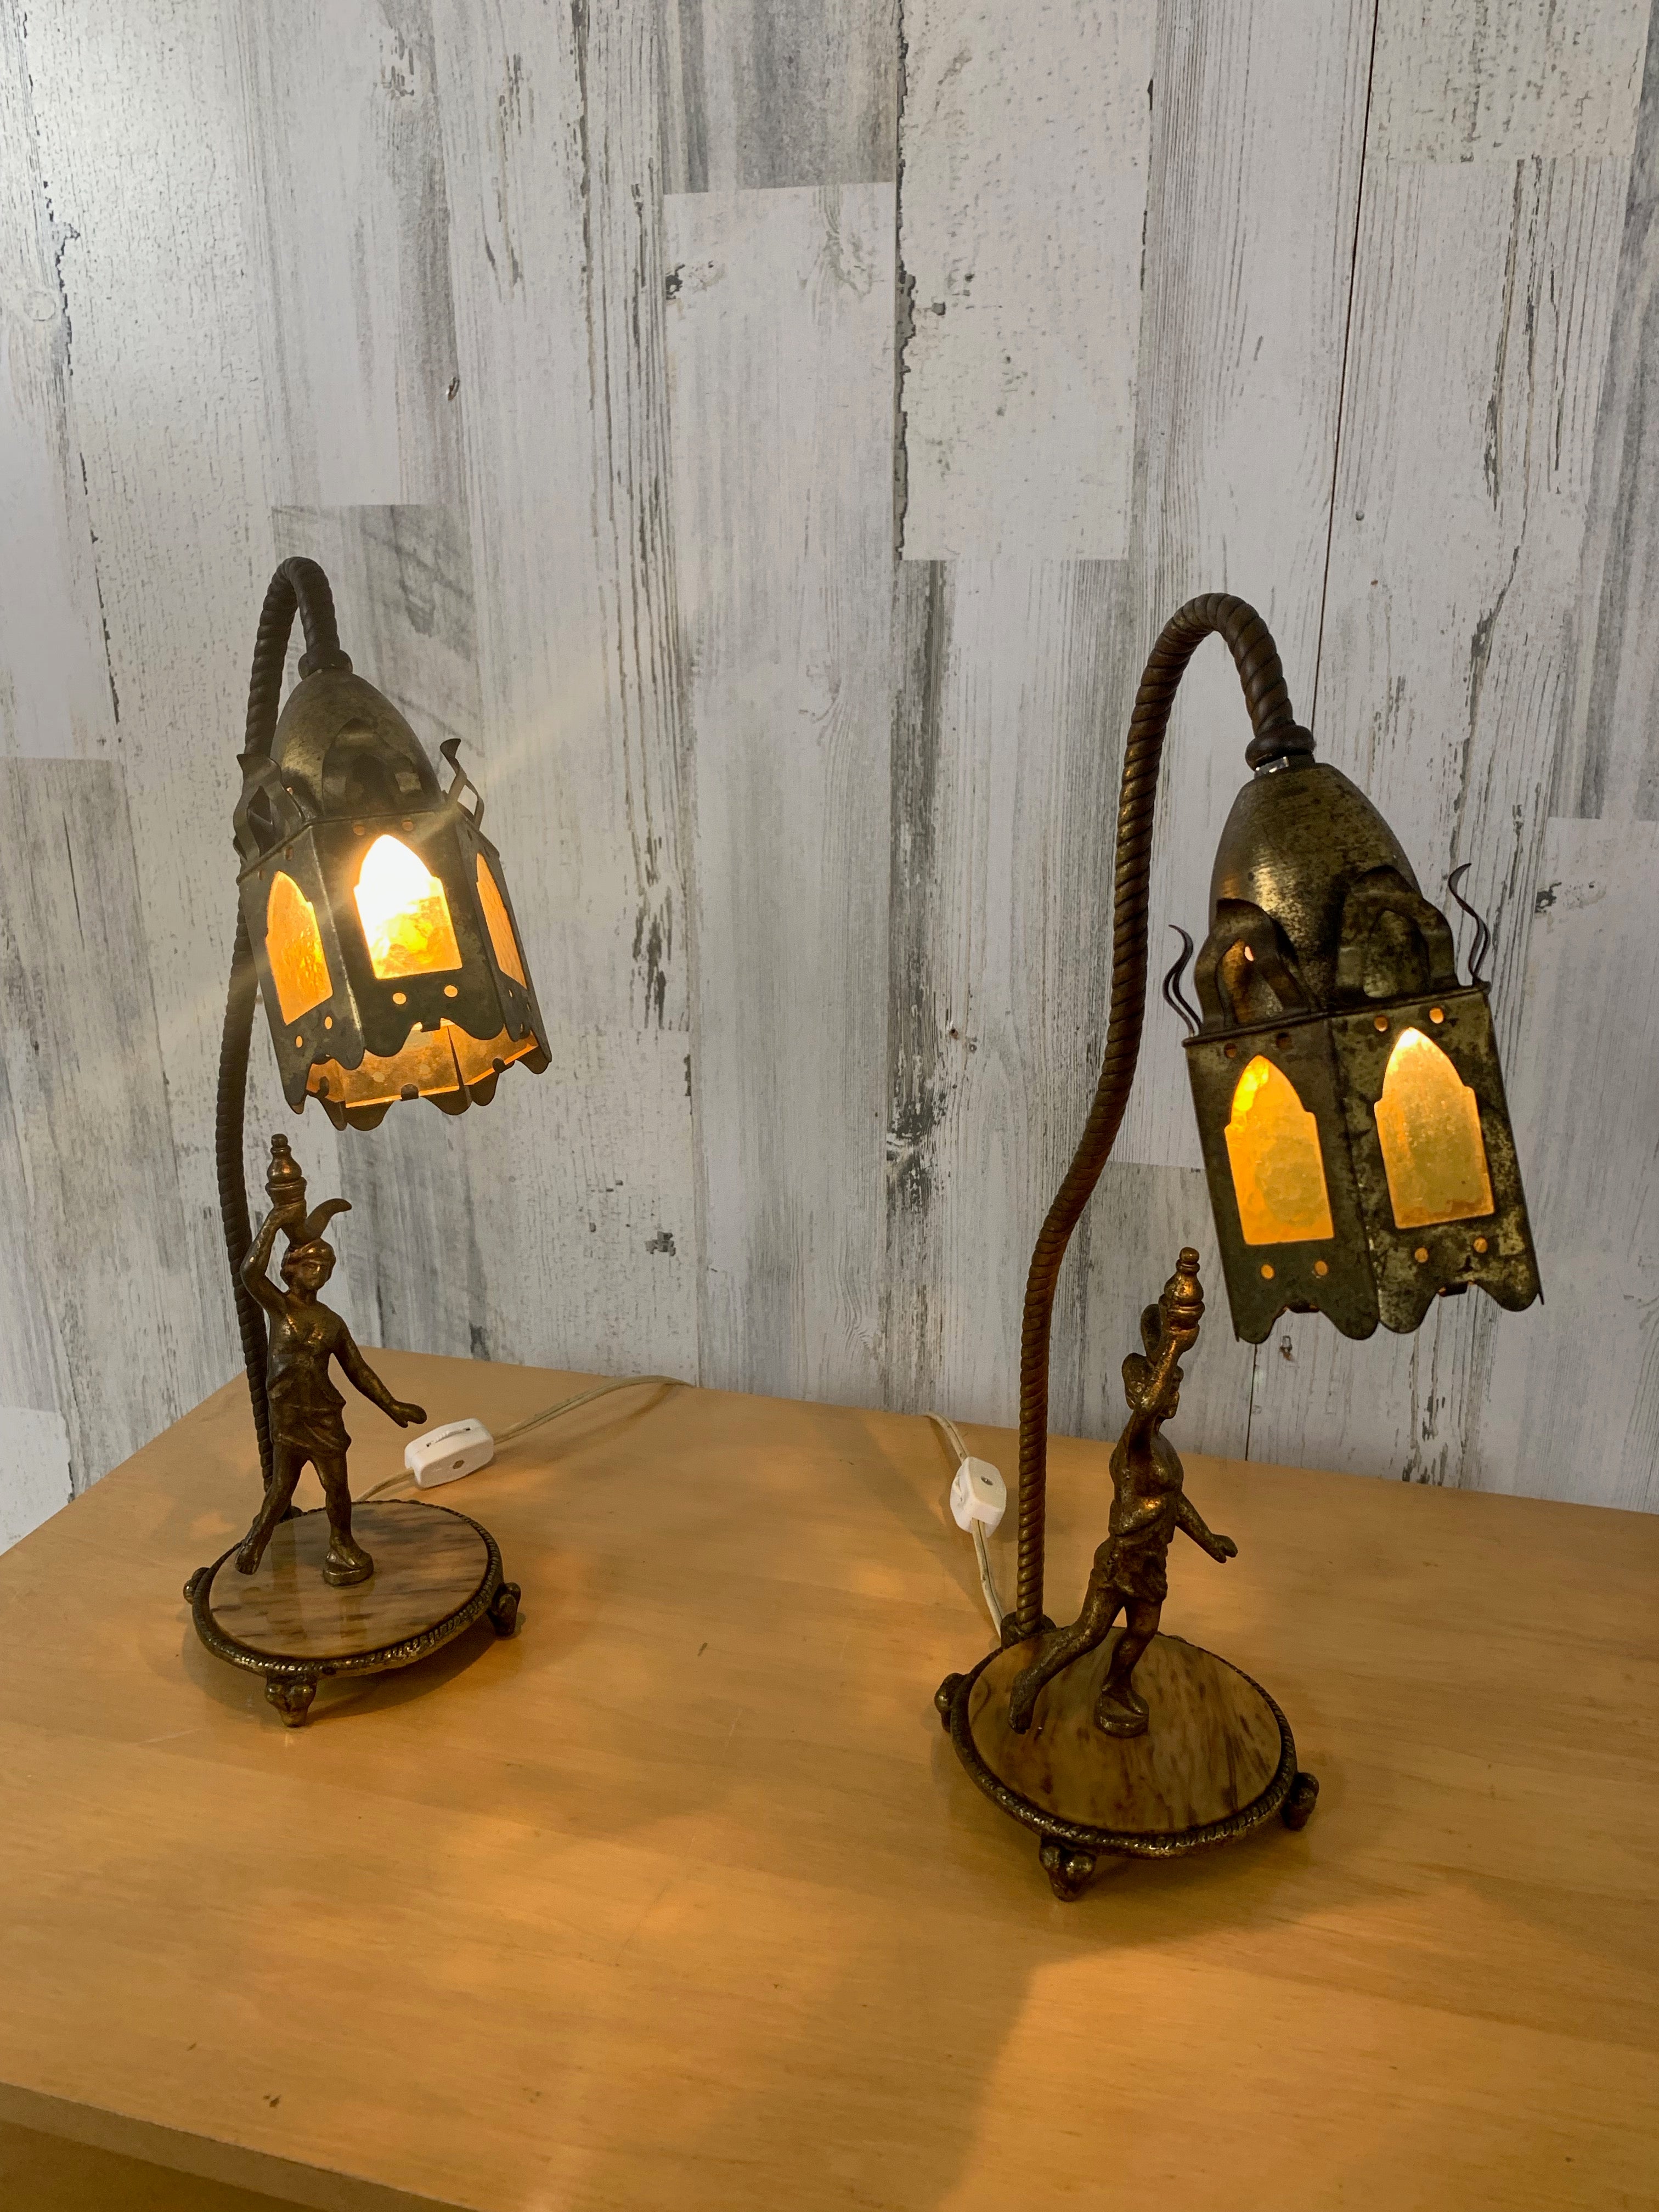 Moroccon style Lantern mantle lamps with a woman figurine mounted on faux marble base of Bakelite. The goose neck swerves upward to the lanterns giving the appearance of swaying in the wind. 